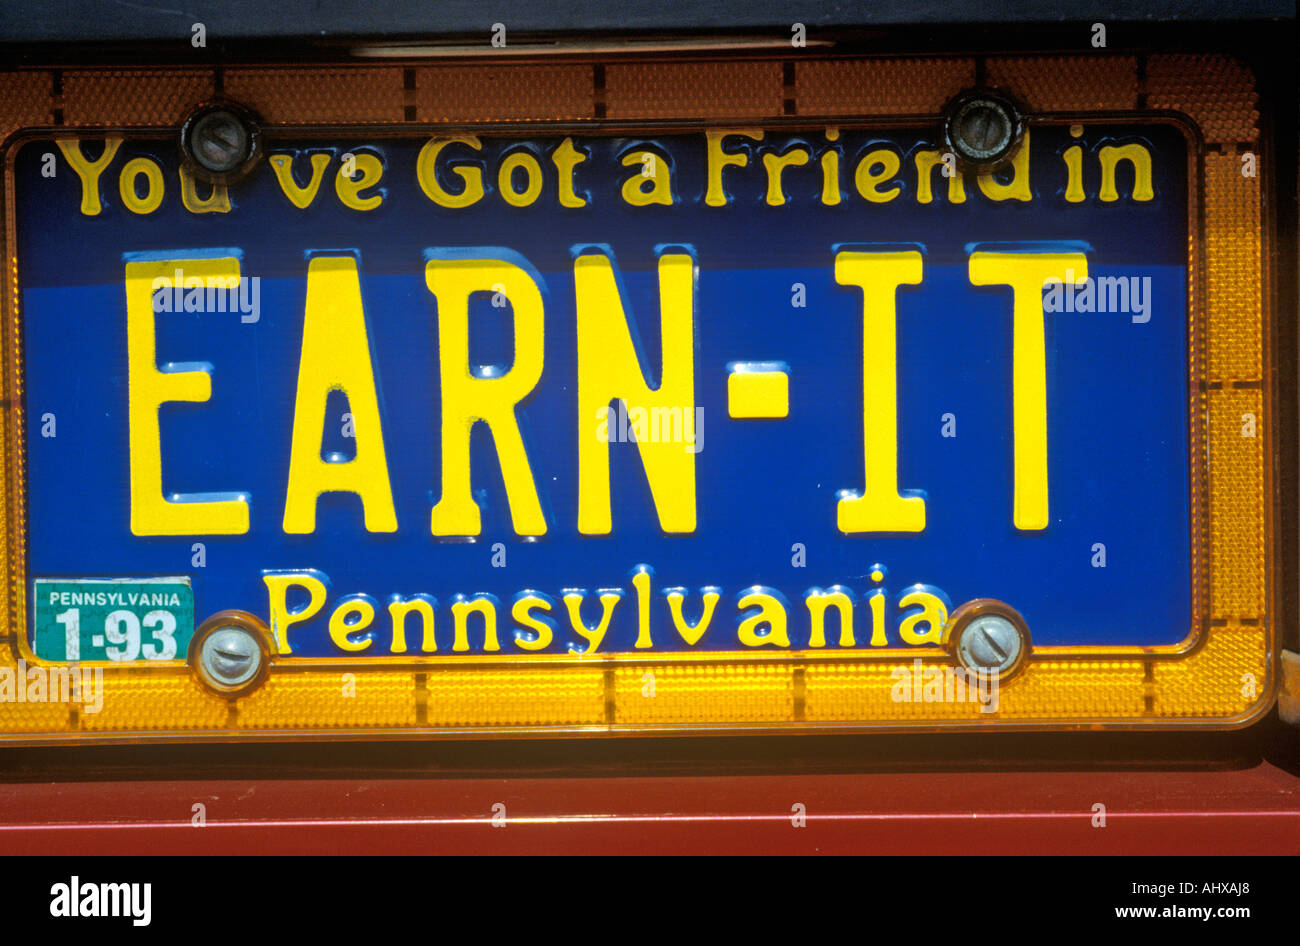 Pennsylvania License Plates High Resolution Stock Photography And Images Alamy